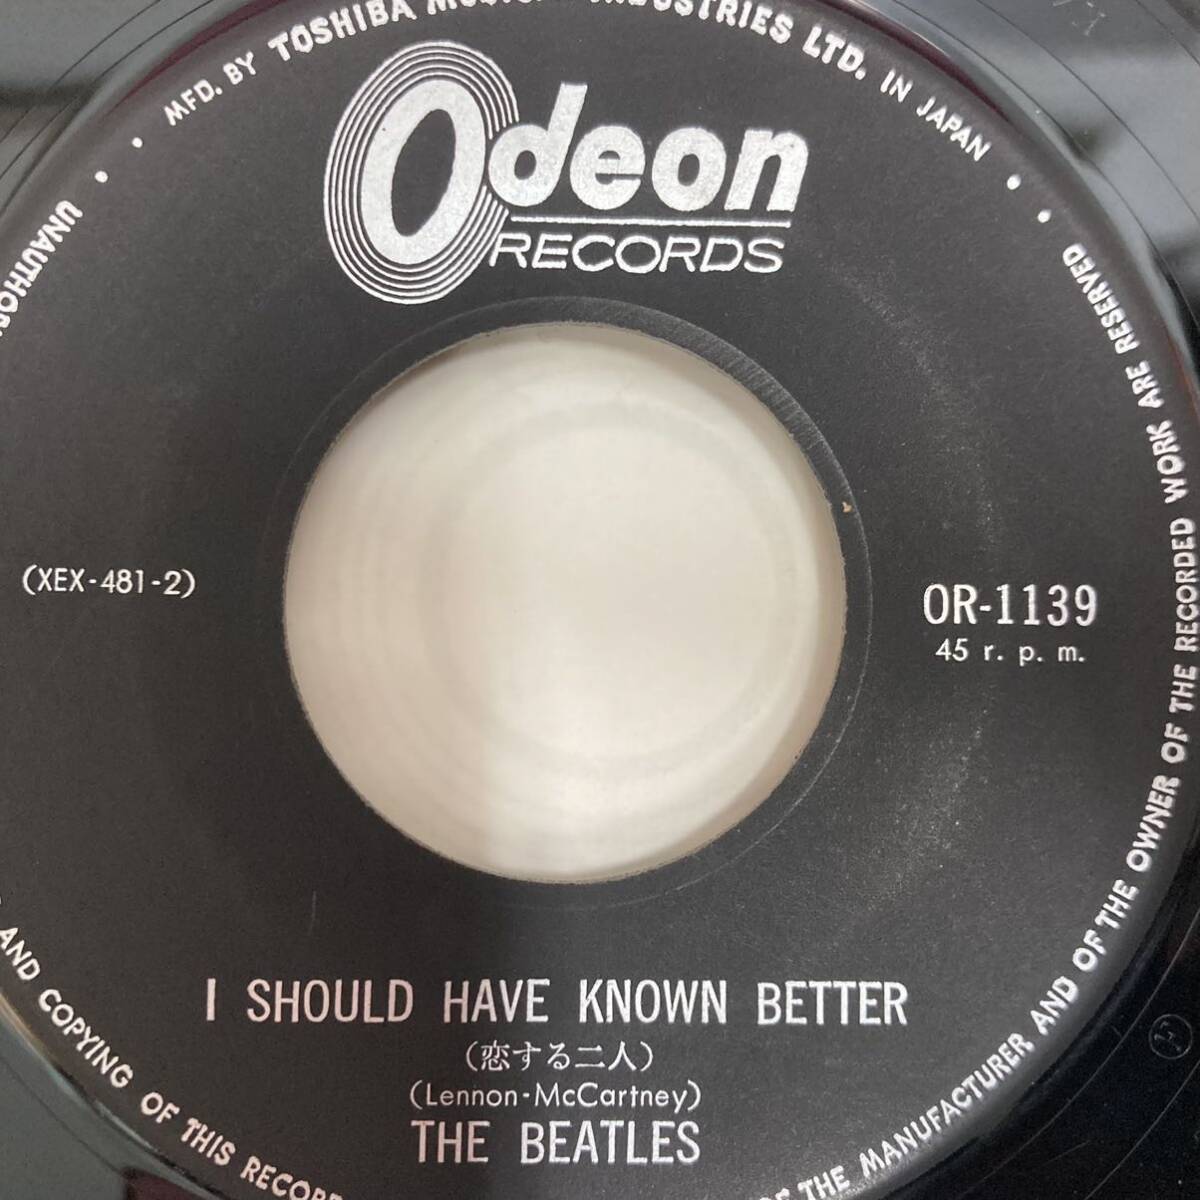 I Should Have Known Better 恋する二人 , I'll Cry Instead / The Beatles ビートルズ【EP アナログ レコード 】サウンドトラック盤 _画像3